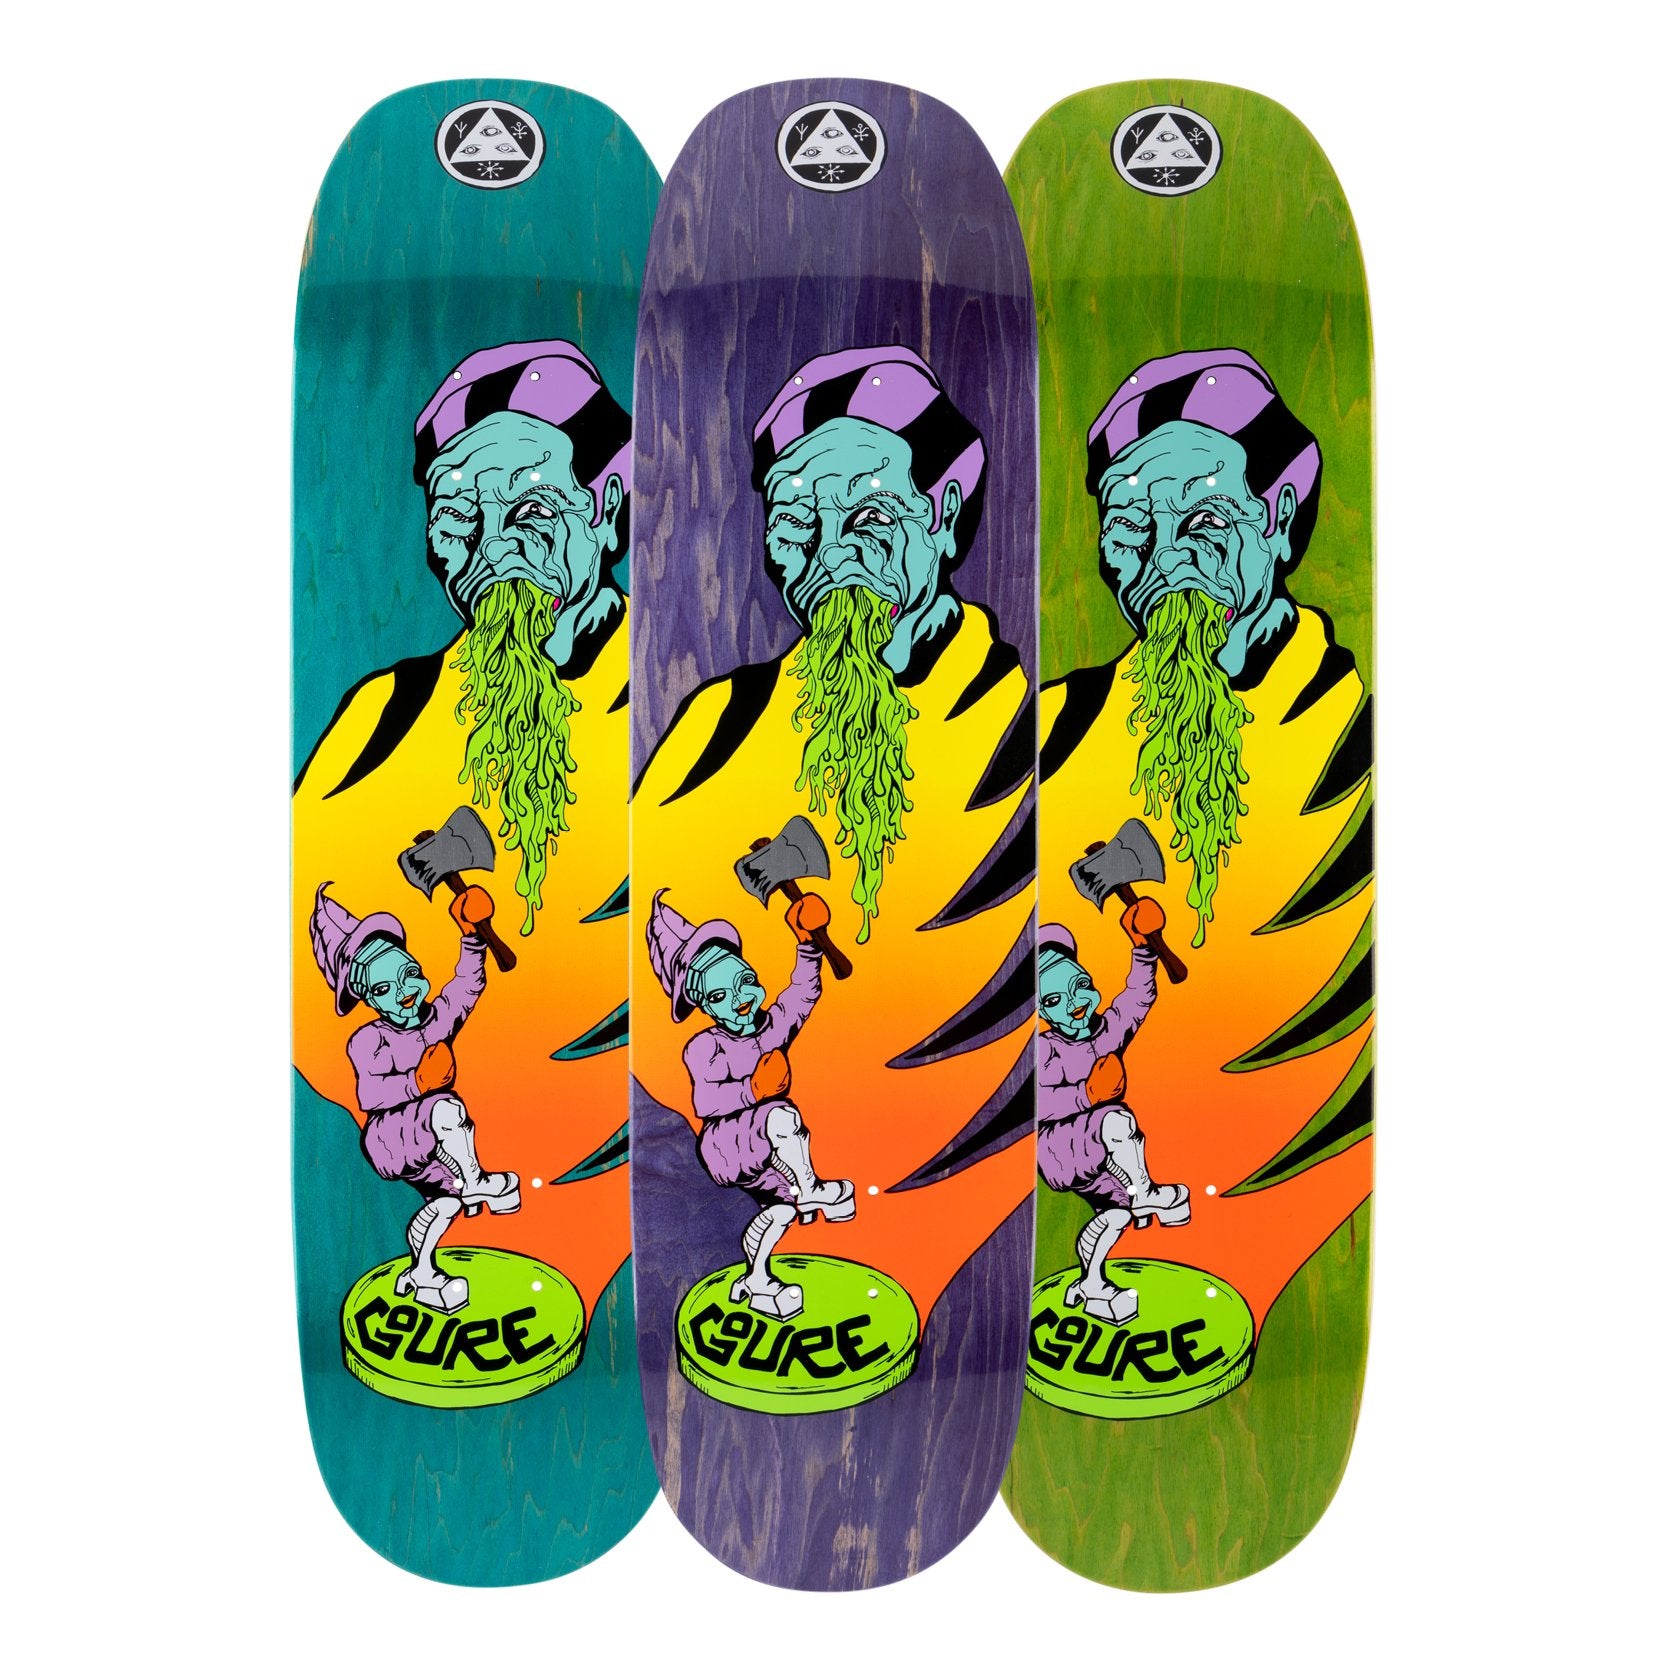 FIRE SALE Welcome Skateboards: Aaron Goure "Divorced Jim" on Moontrimmer 2.0- Assorted Stain 8.5" Deck